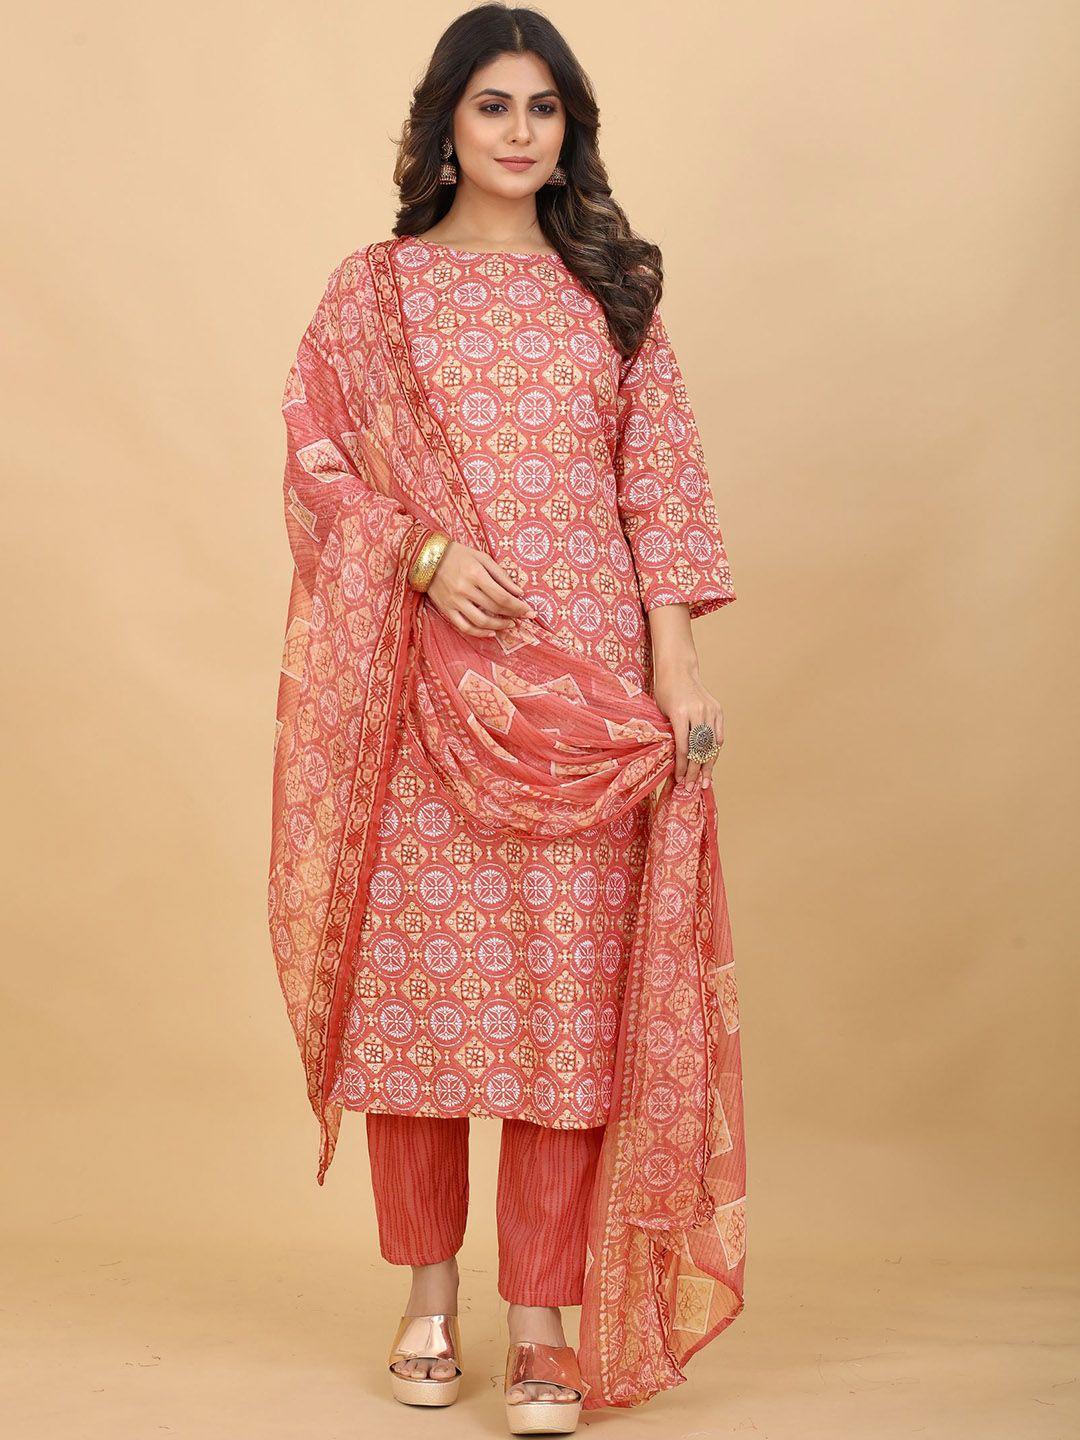 premroop- the style you love floral printed round neck straight kurta set with dupatta